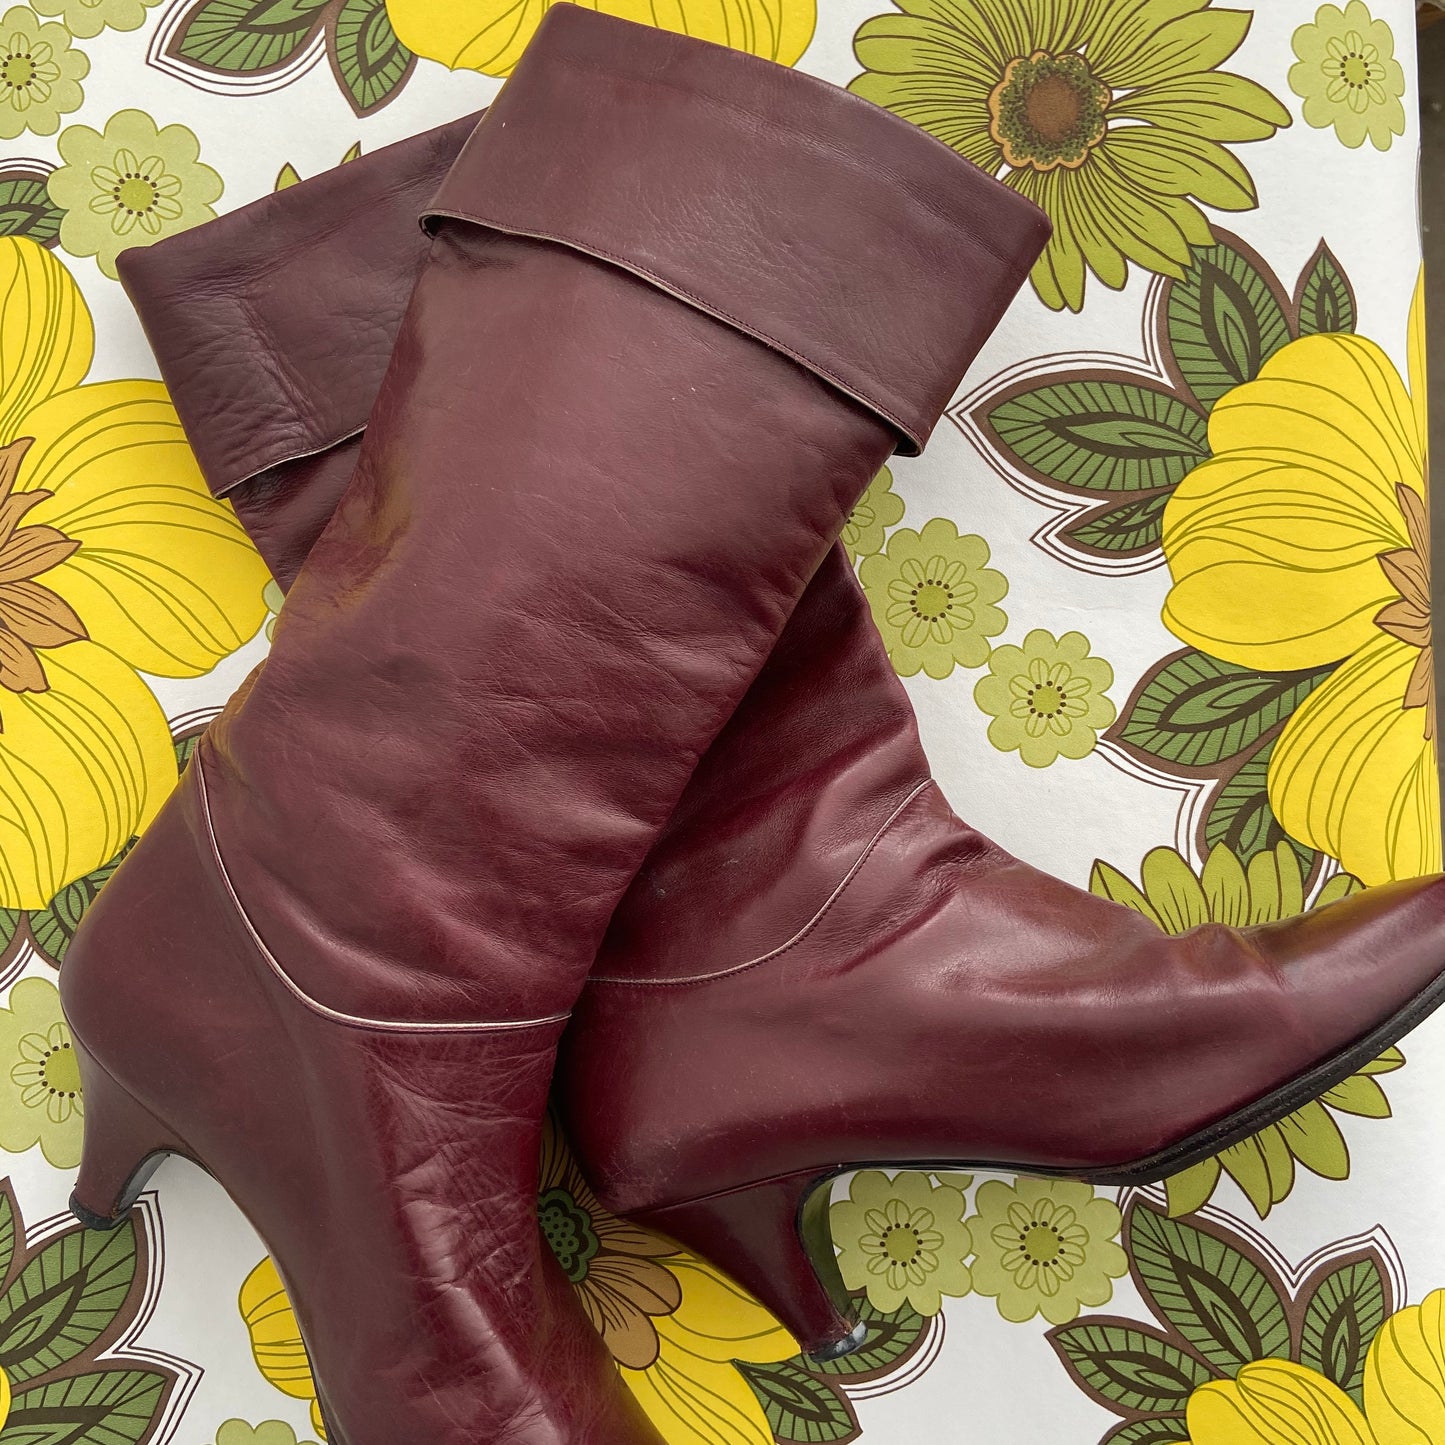 VINTAGE Boots Genuine LEATHER Beautiful Size 37